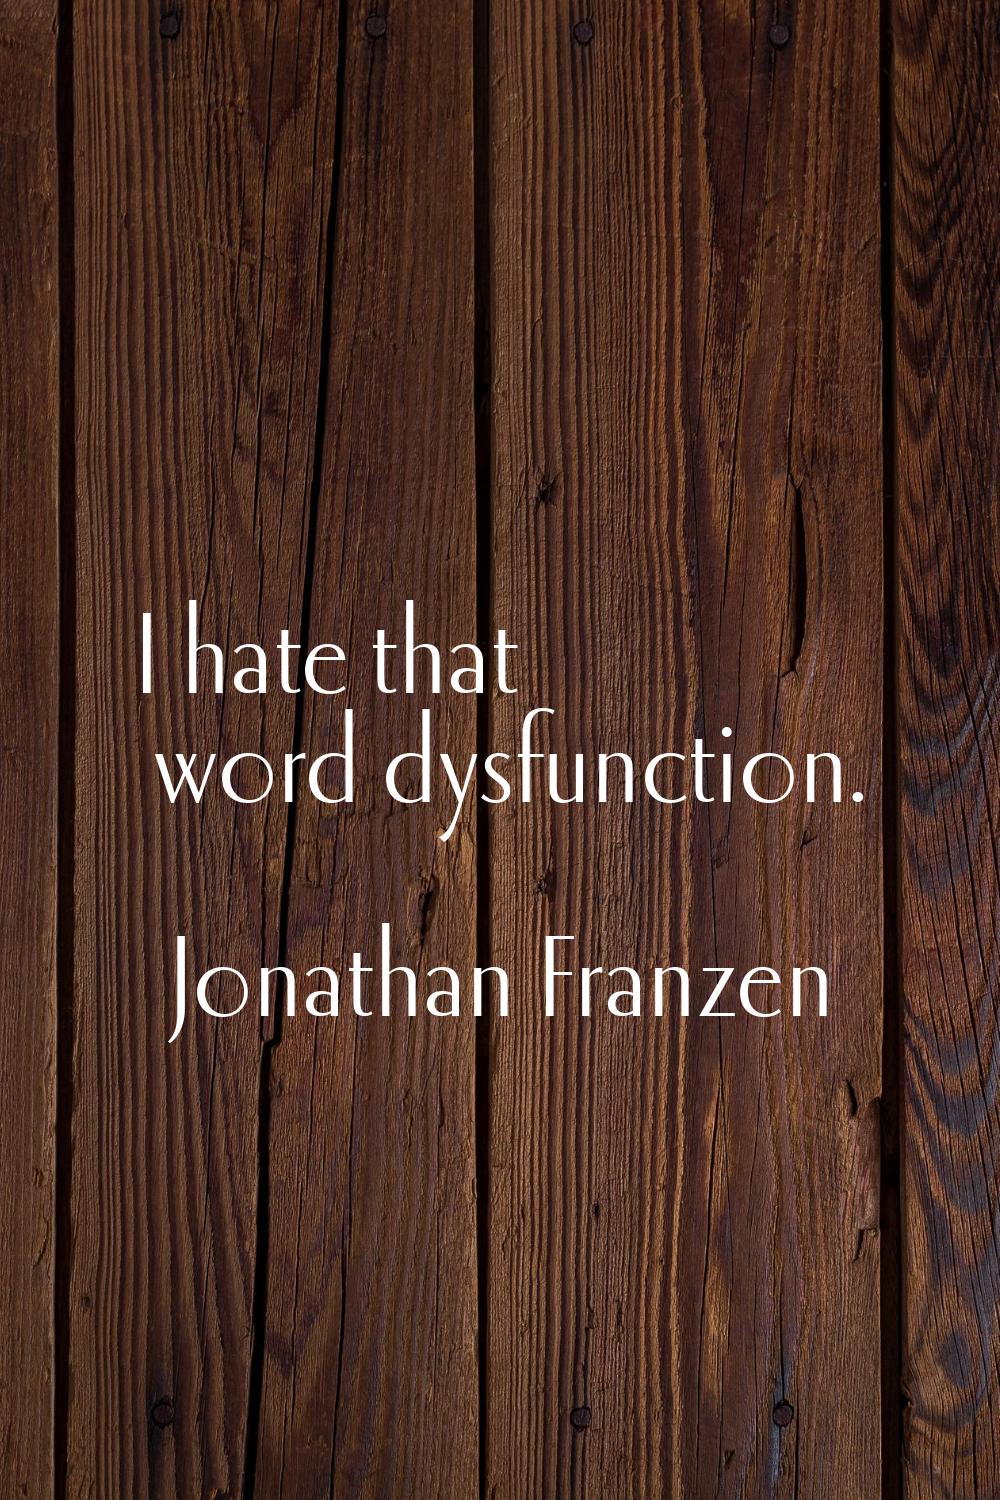 I hate that word dysfunction.